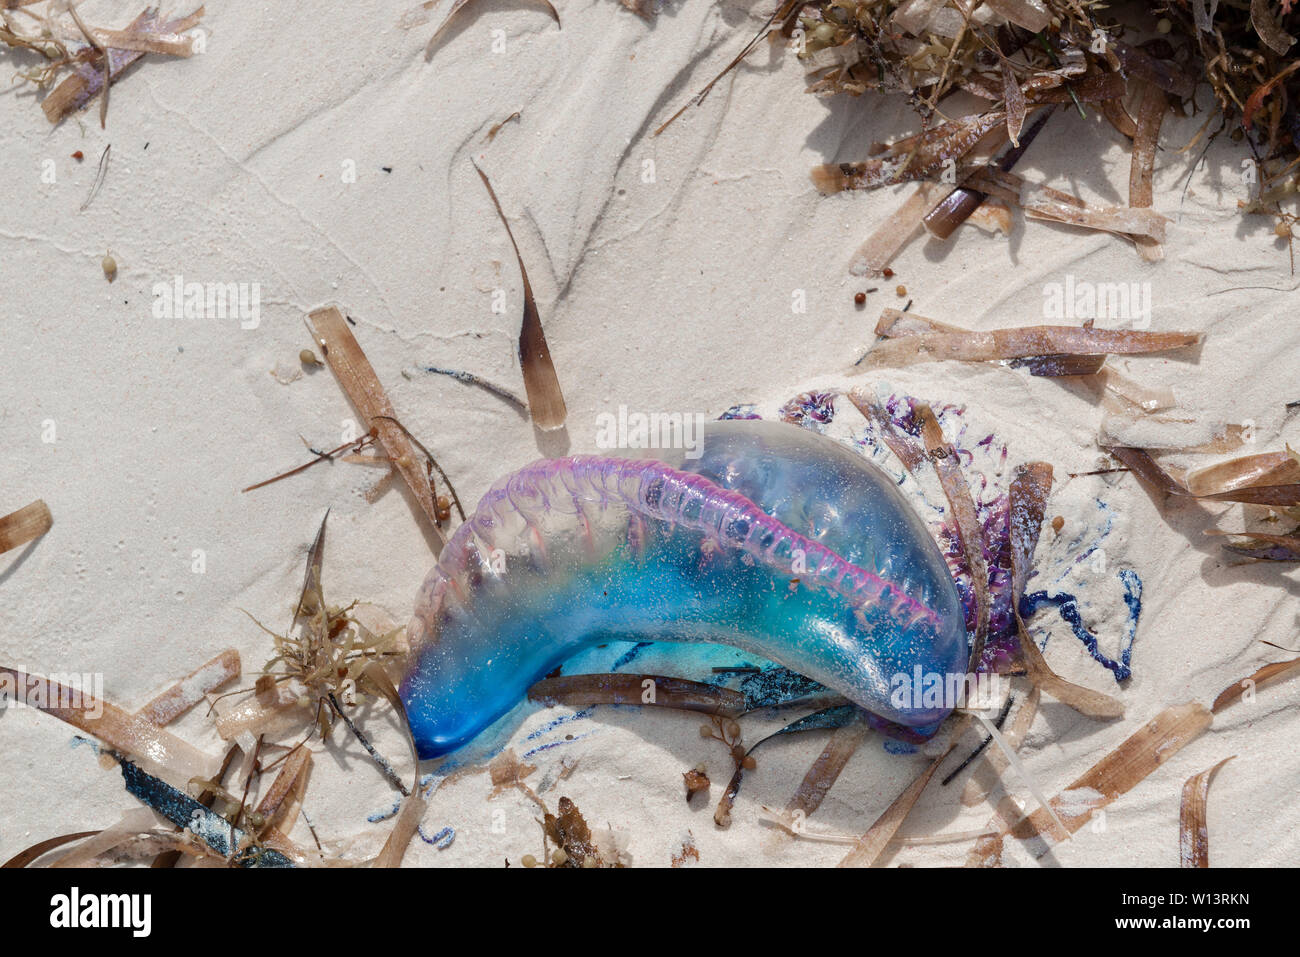 Portuguese man of war (Physalia Physalis) washed up on beach on Cayo Levisa, Cuba, Caribbean showing its gas-filled bladder or pneumatophore Stock Photo